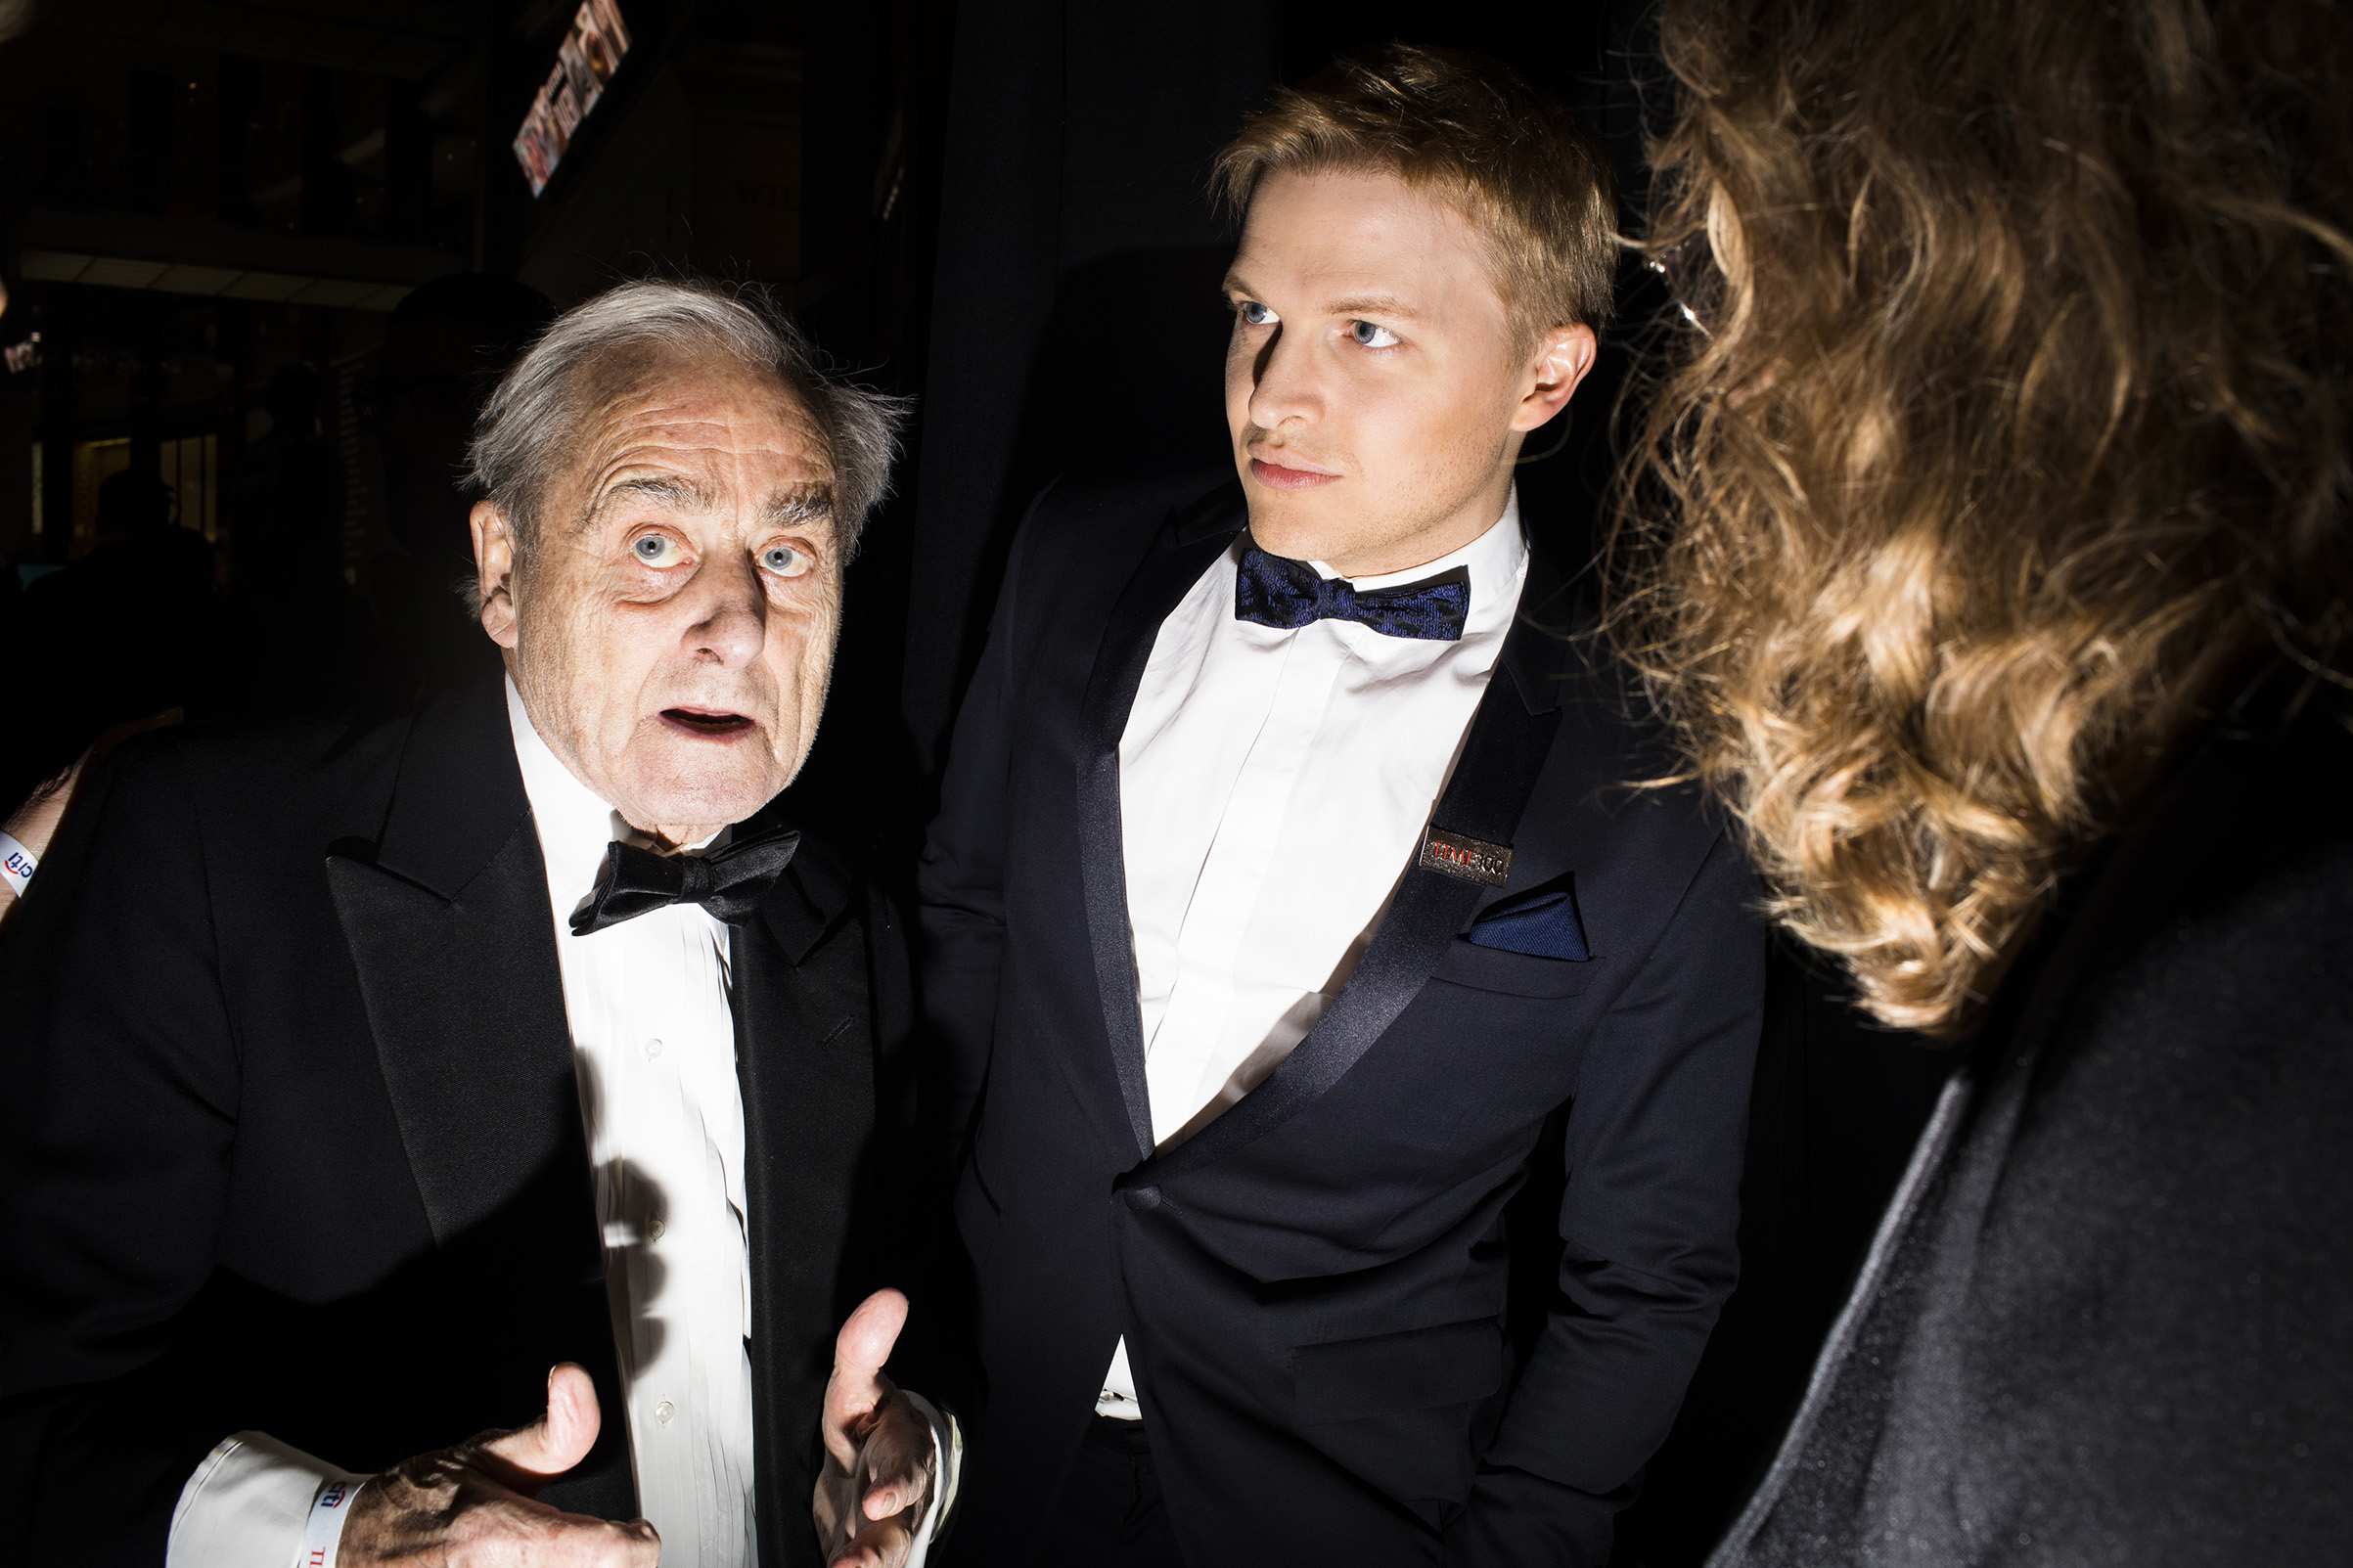 Sir Harold Evans, left, and Ronan Farrow, center, at the Time 100 Gala at Jazz at Lincoln Center on April 24, 2018 in New York City. (Landon Nordeman for TIME)